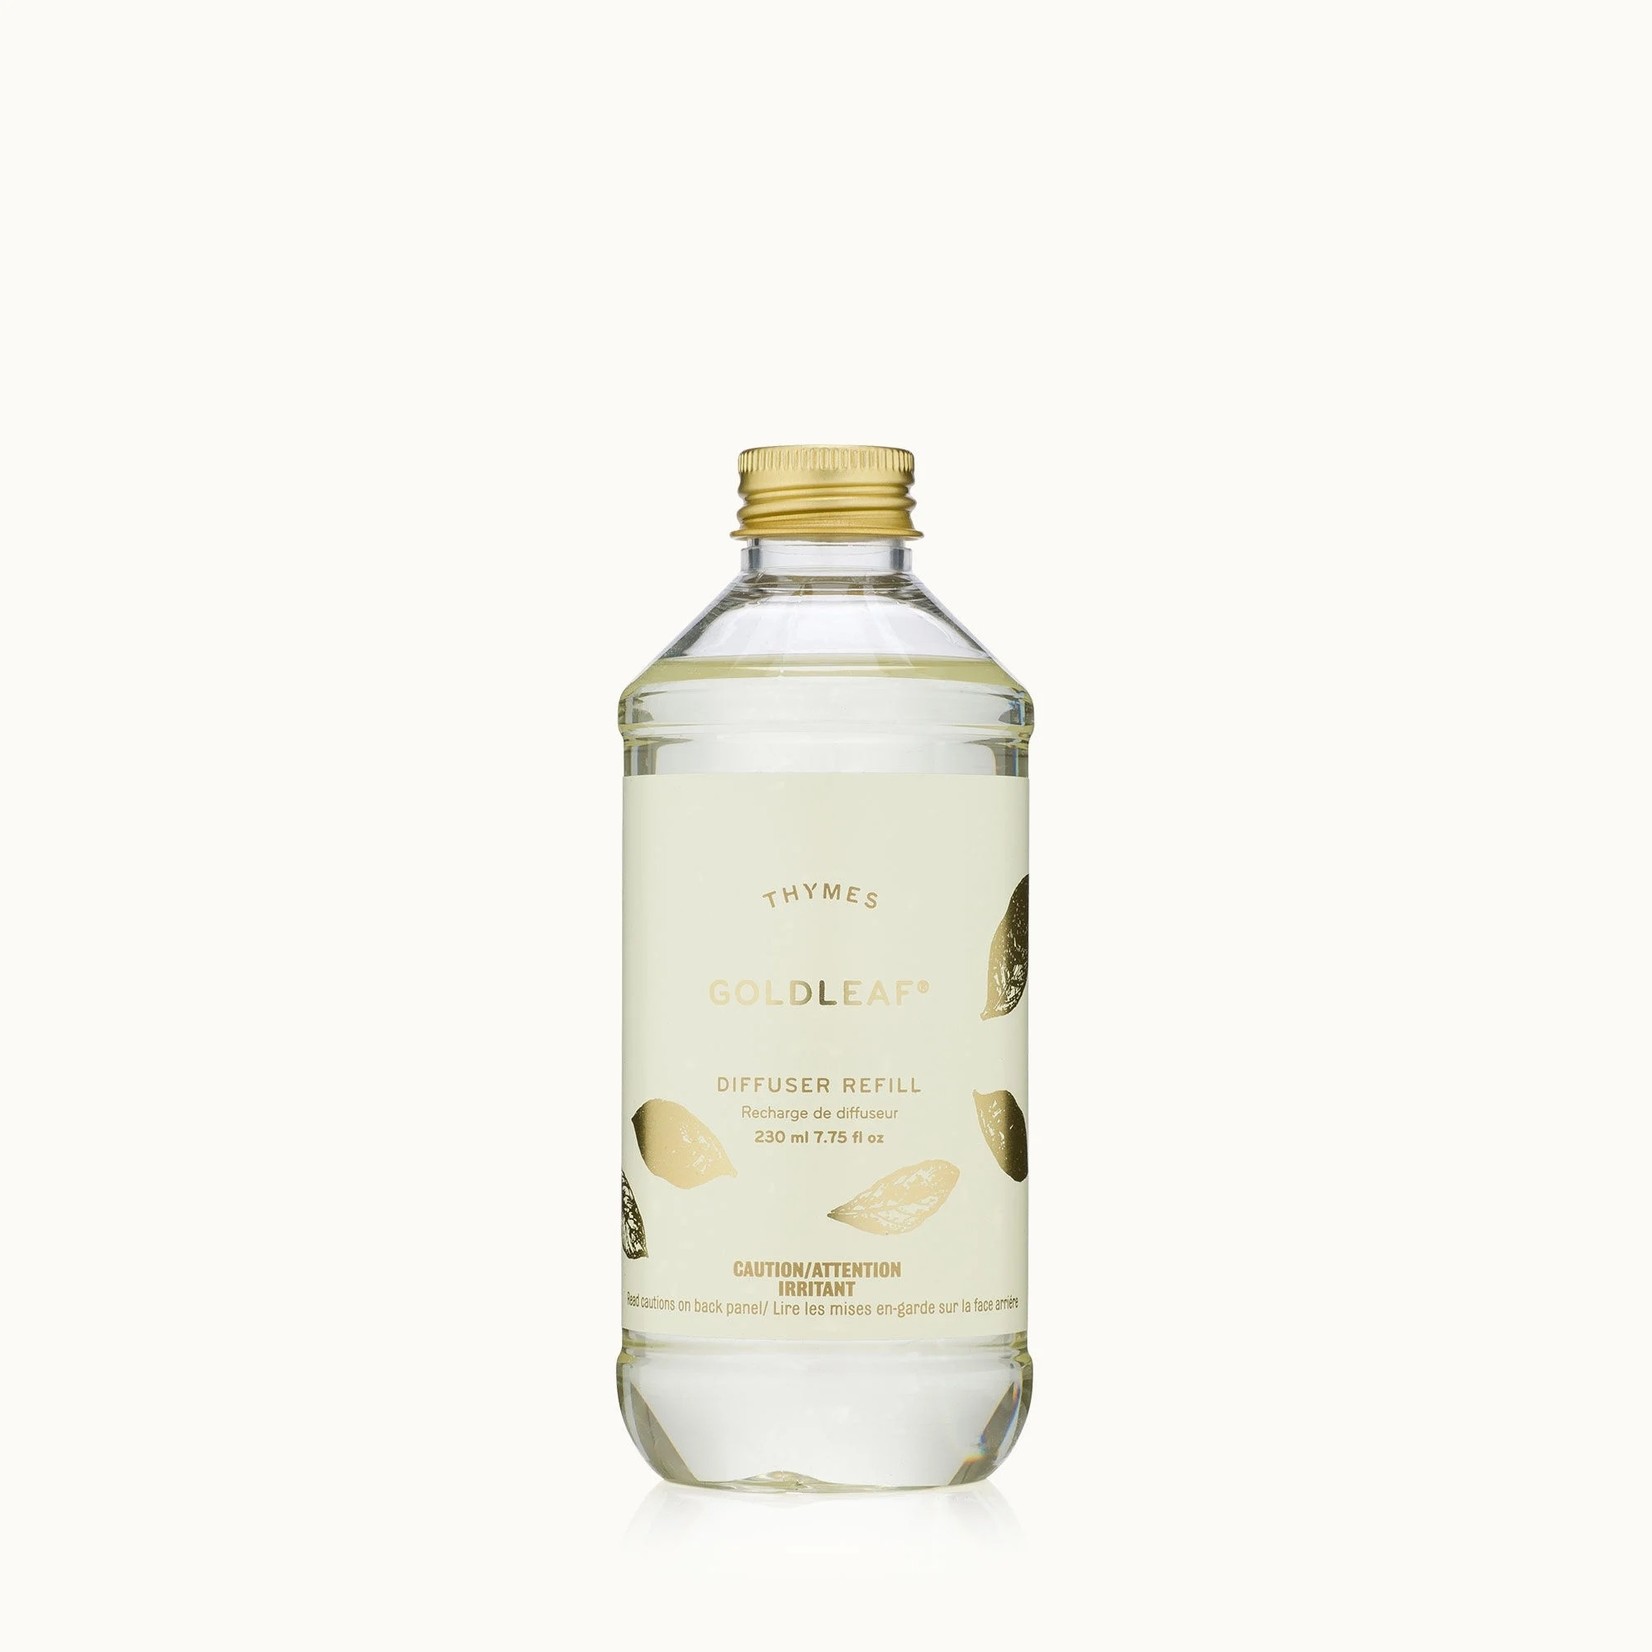 Thymes Goldleaf Reed Diffuser Oil Refill